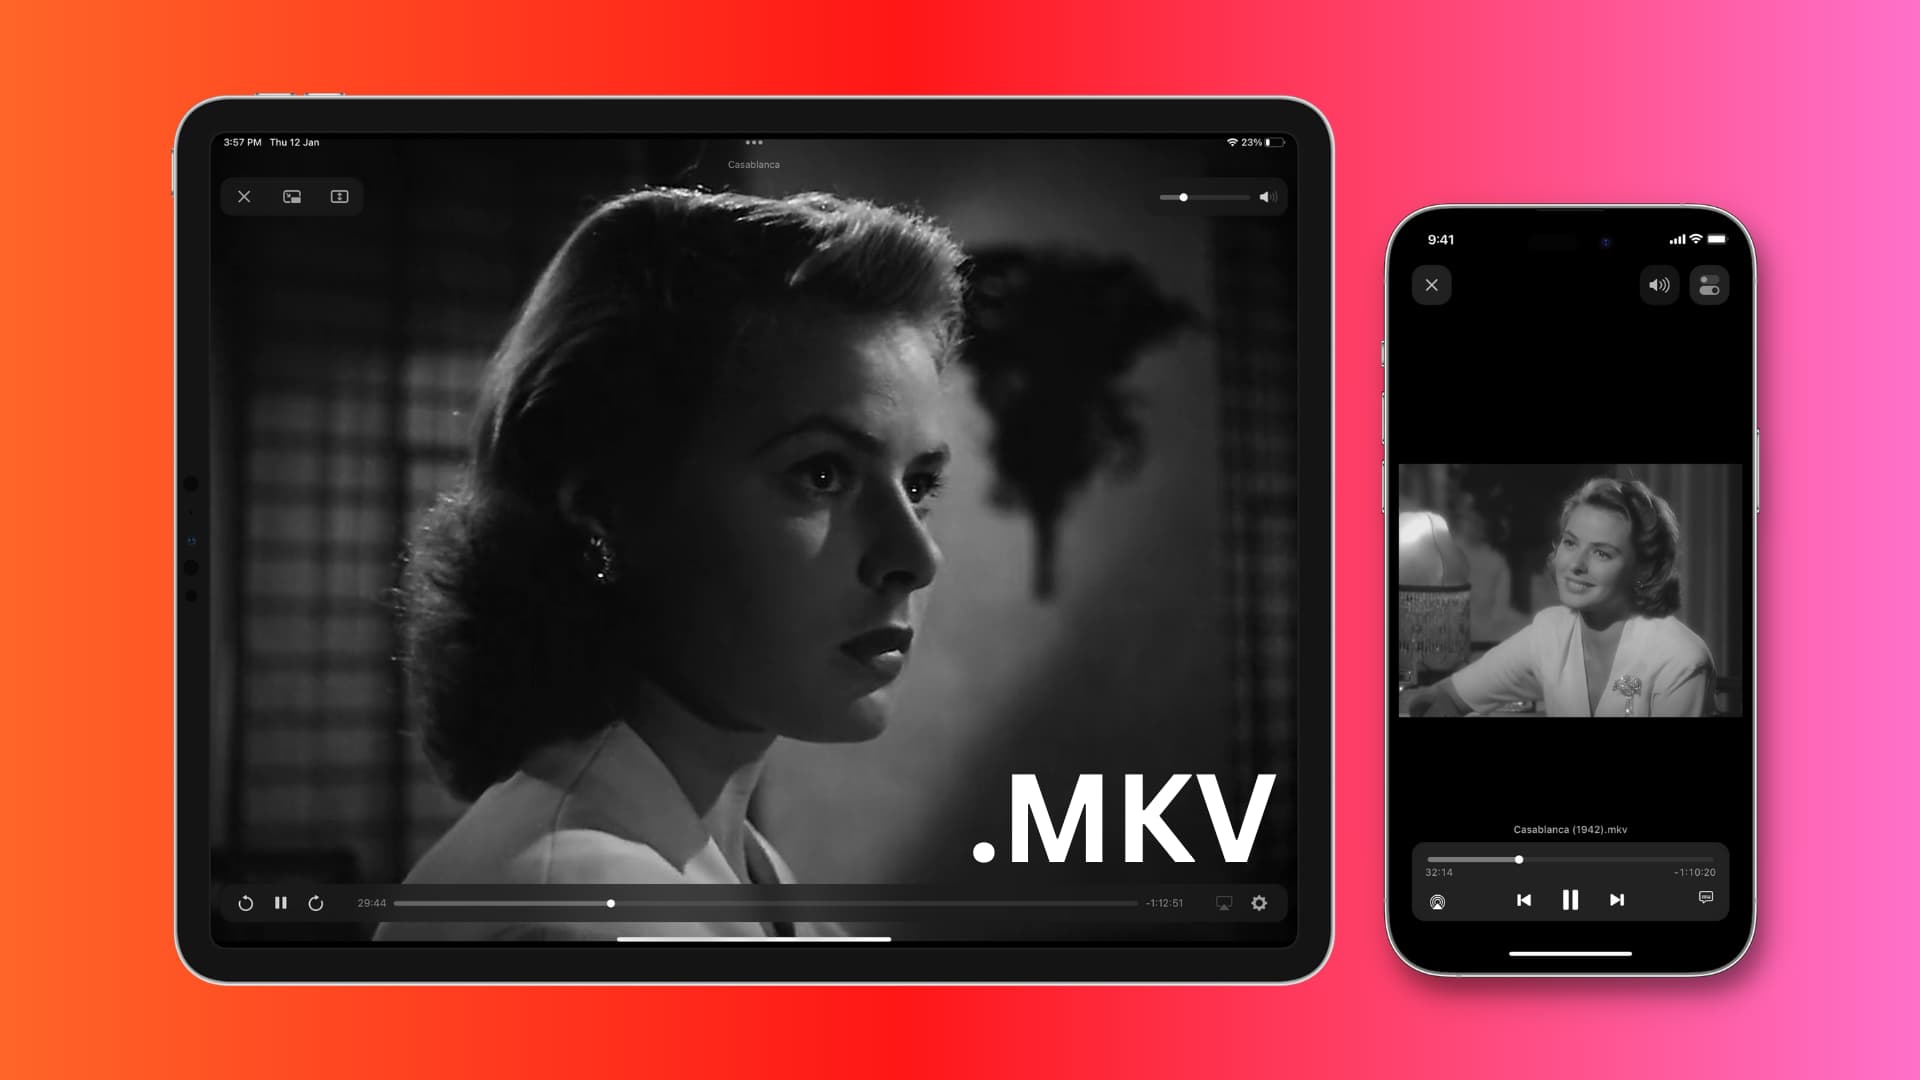 Playing MKV video file on iPhone and iPad